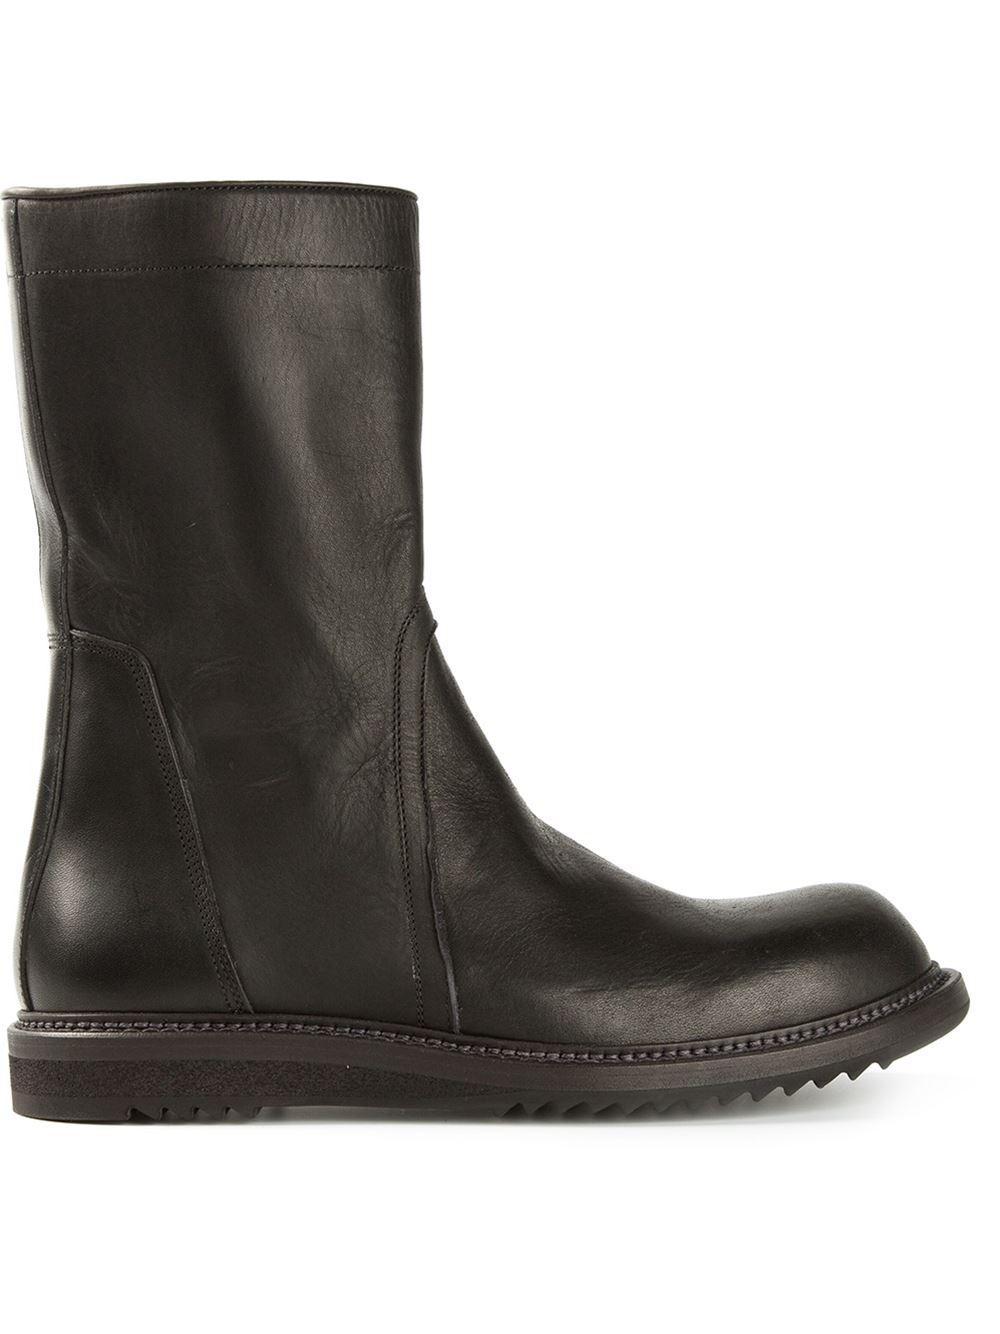 Lyst - Rick Owens Creeper Boots in Black for Men